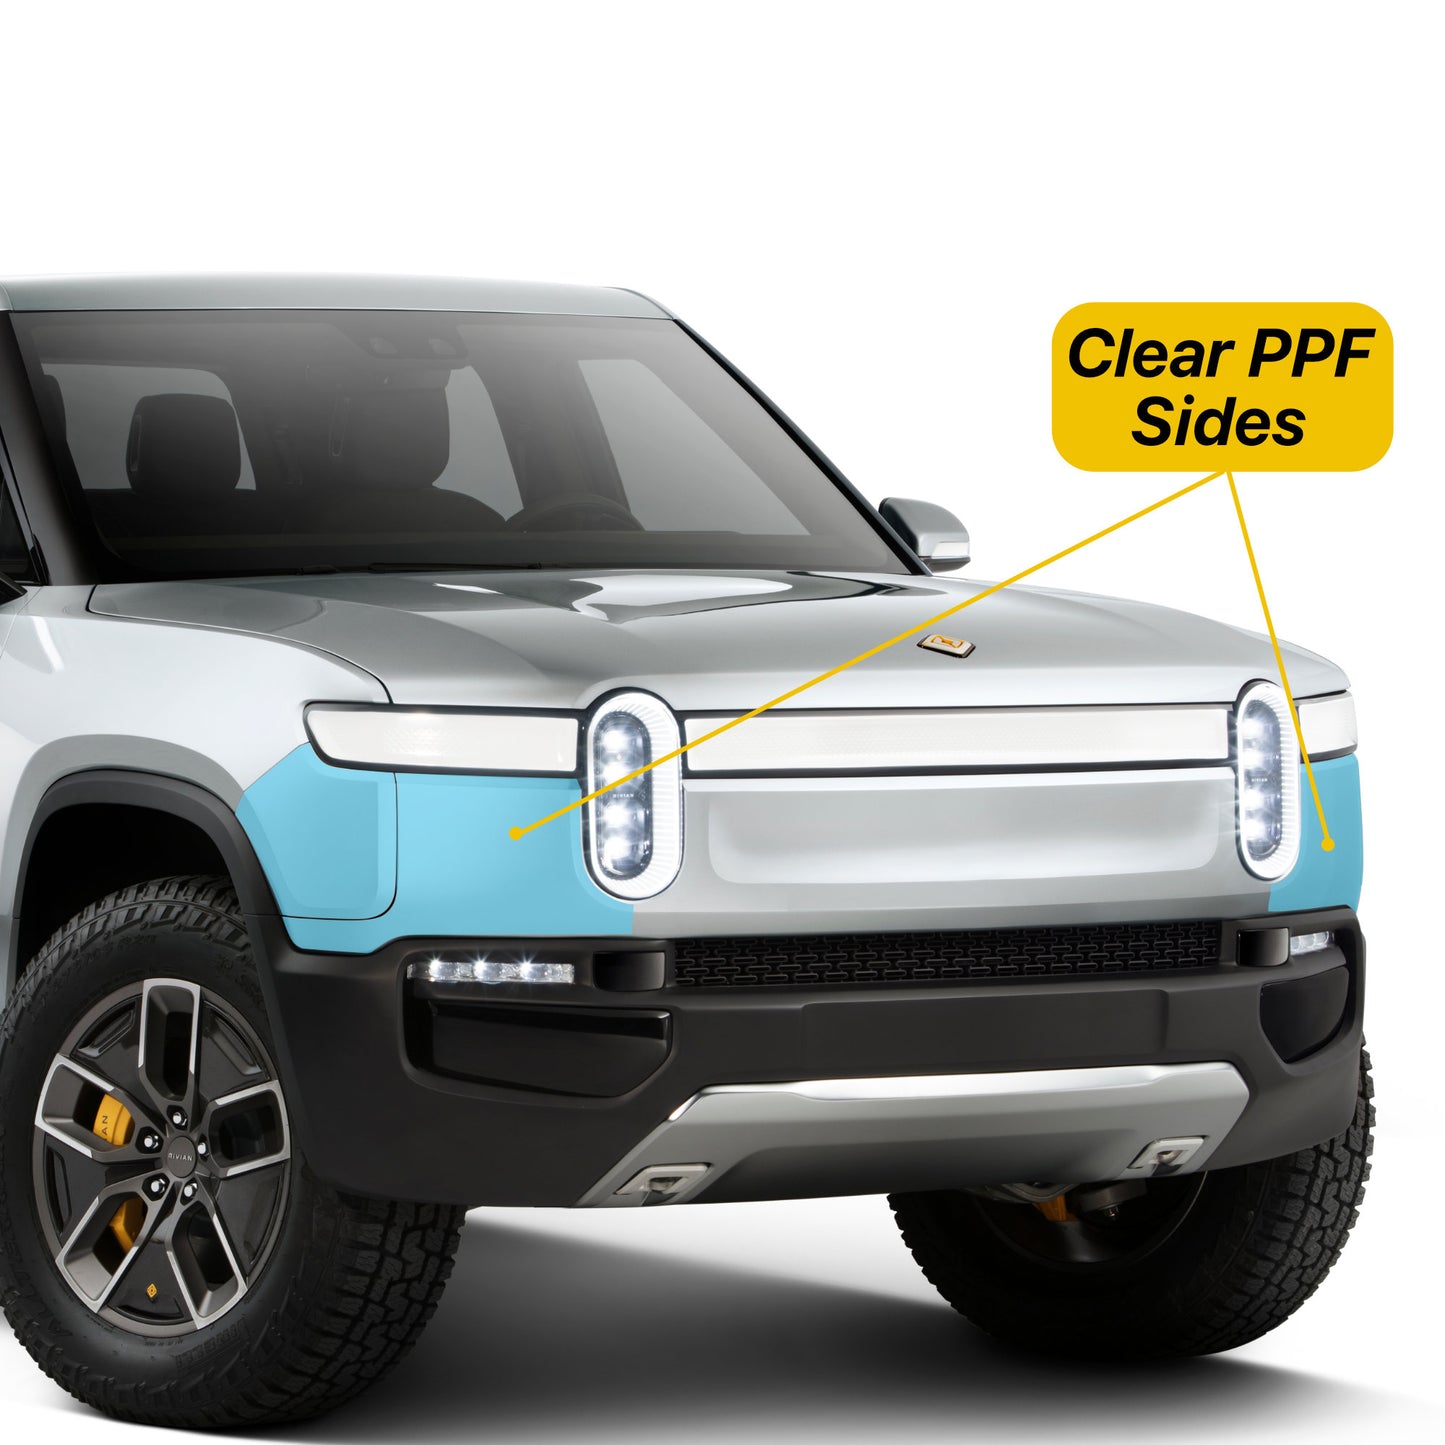 Bumper Clear Protection Film (PPF) for Rivian R1T / R1S 2021-2025